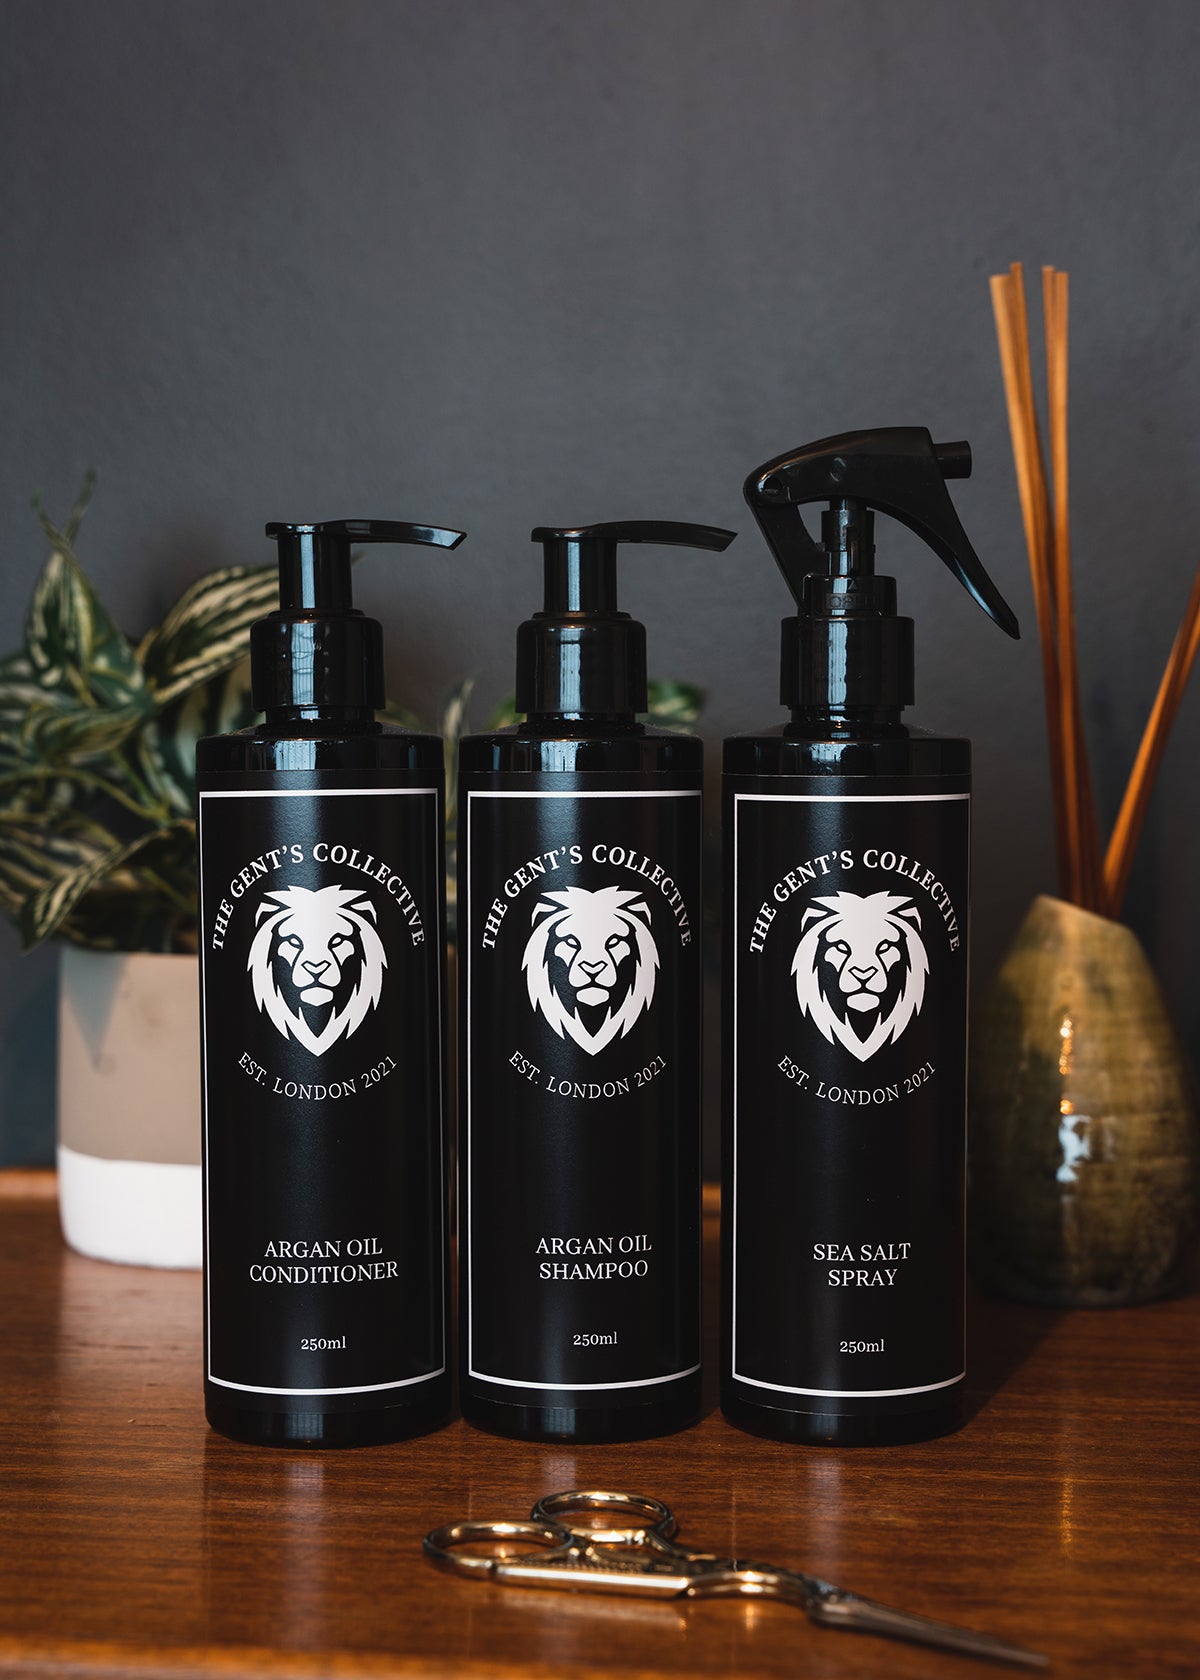 Argan Oil Conditioner - The Gent's Collective